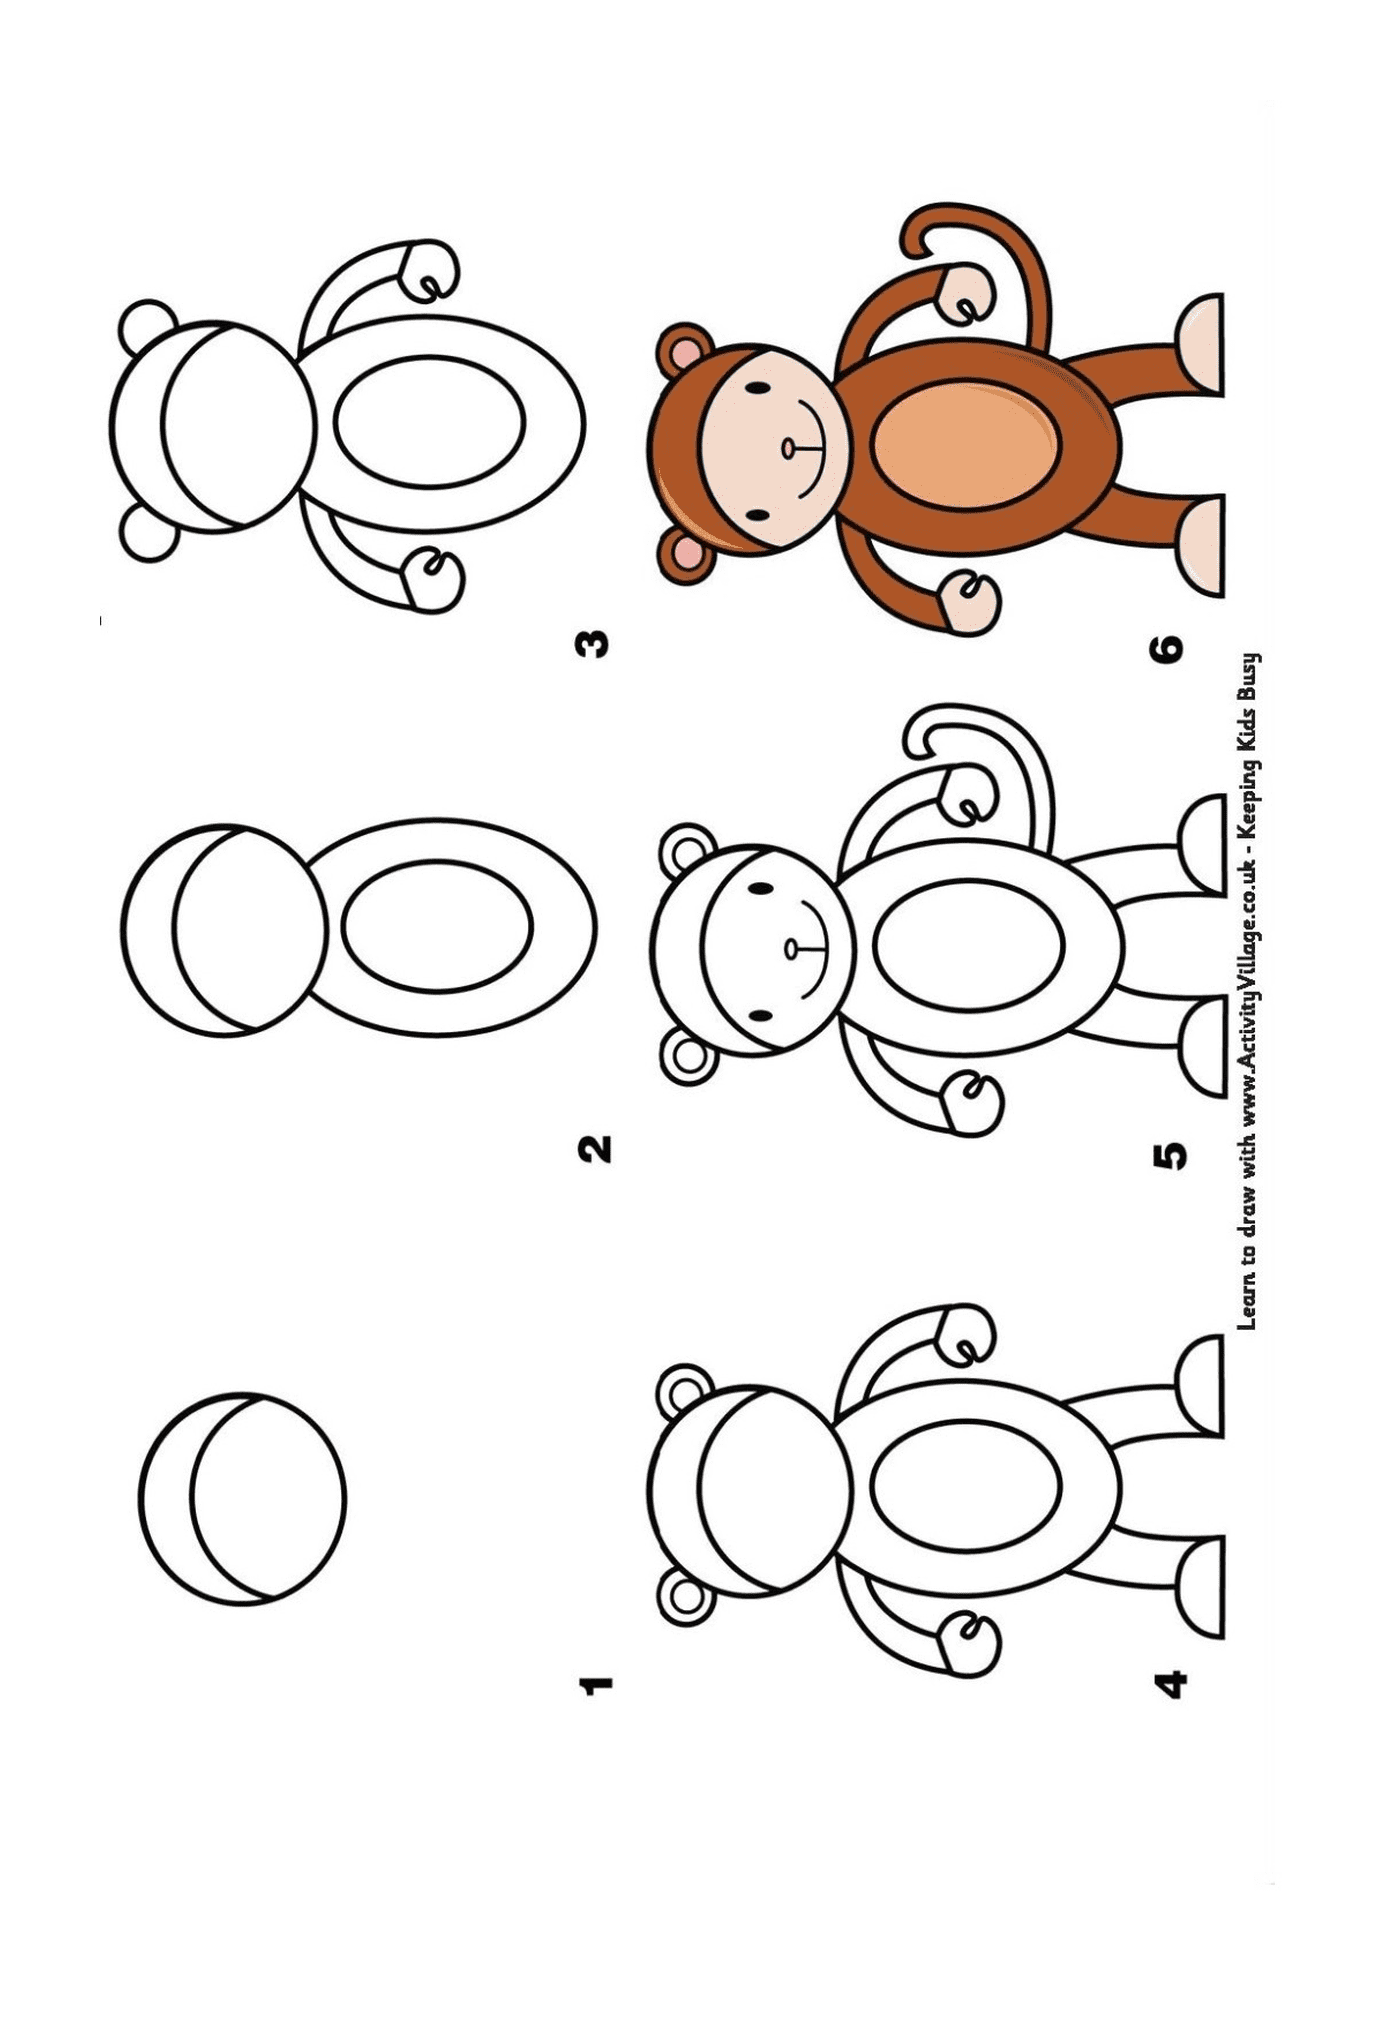  How to draw a monkey step by step 